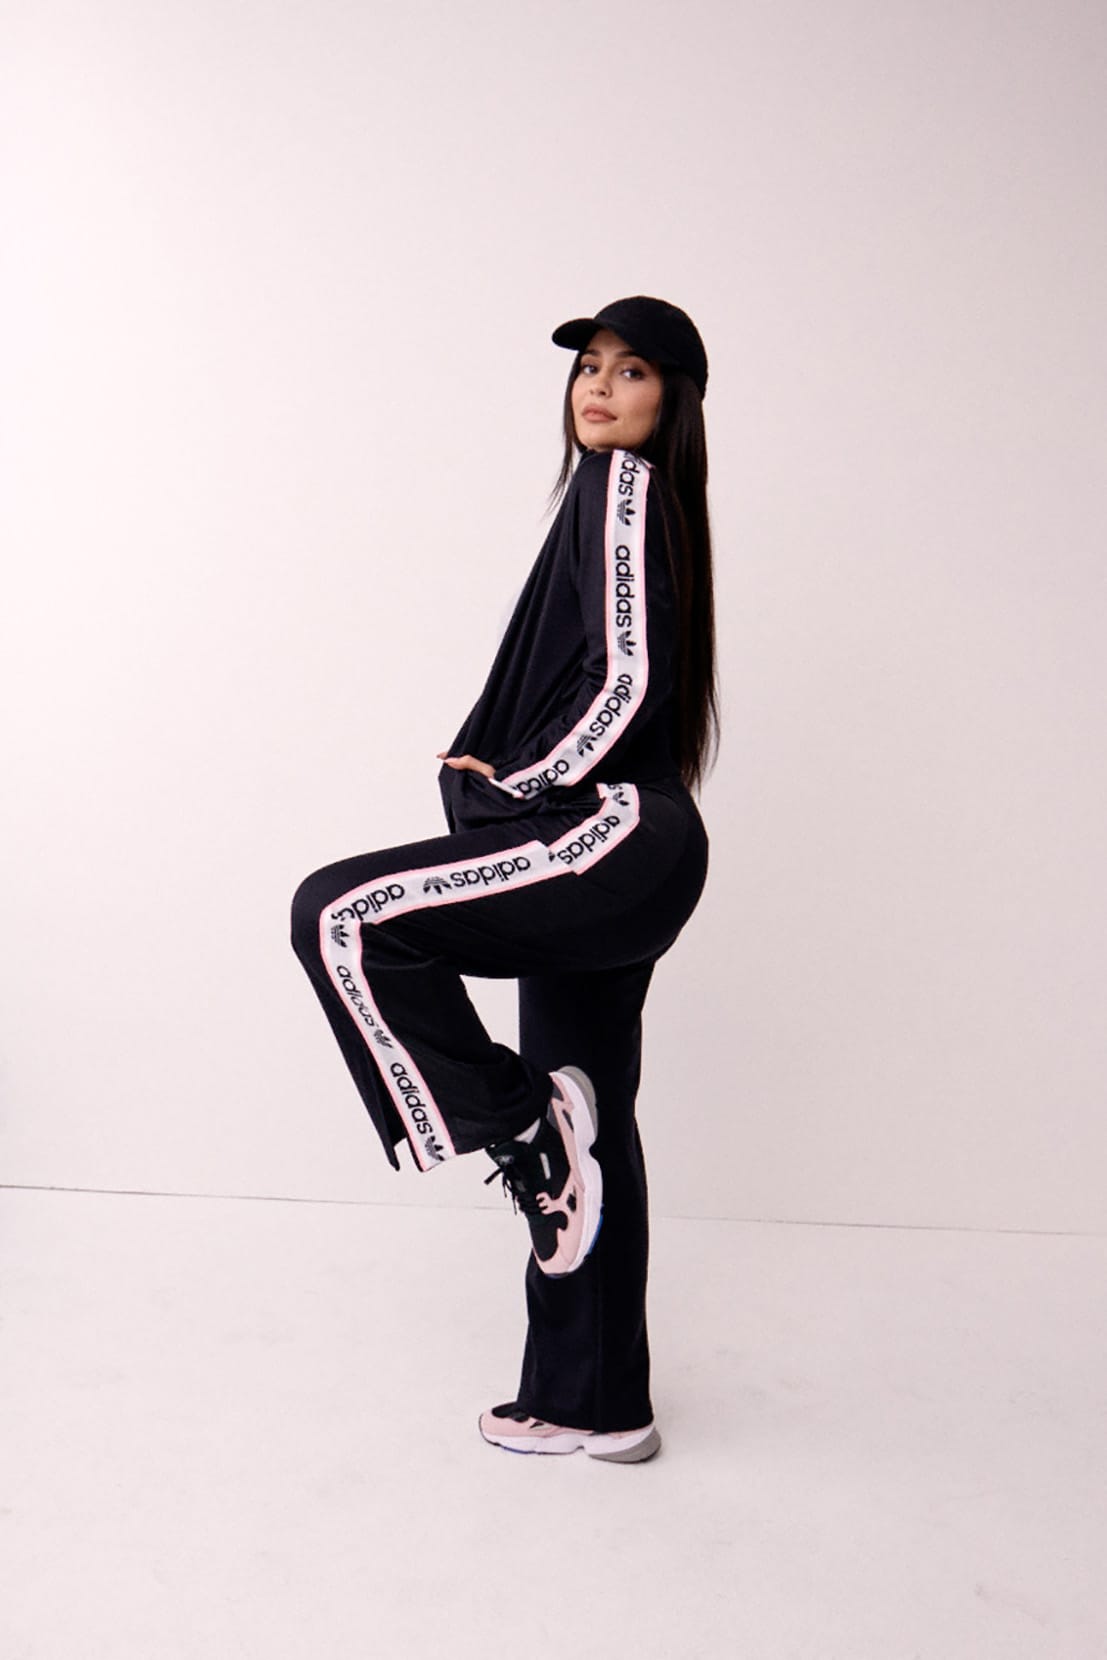 kylie jenner and adidas